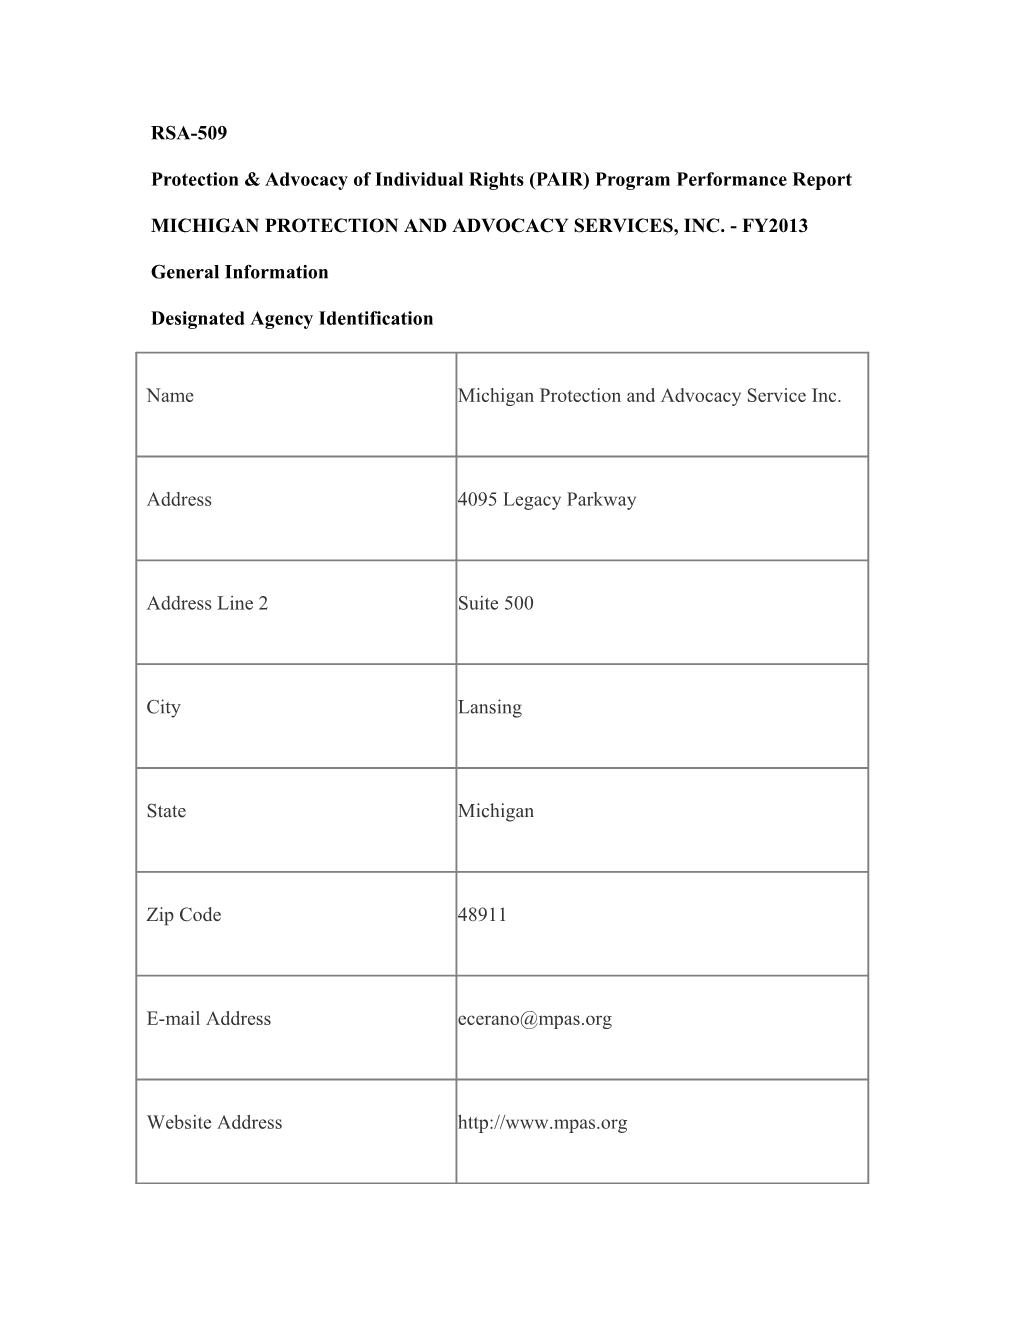 RSA-509 - Protection & Advocacy of Individual Rights (PAIR) Program Performance Report